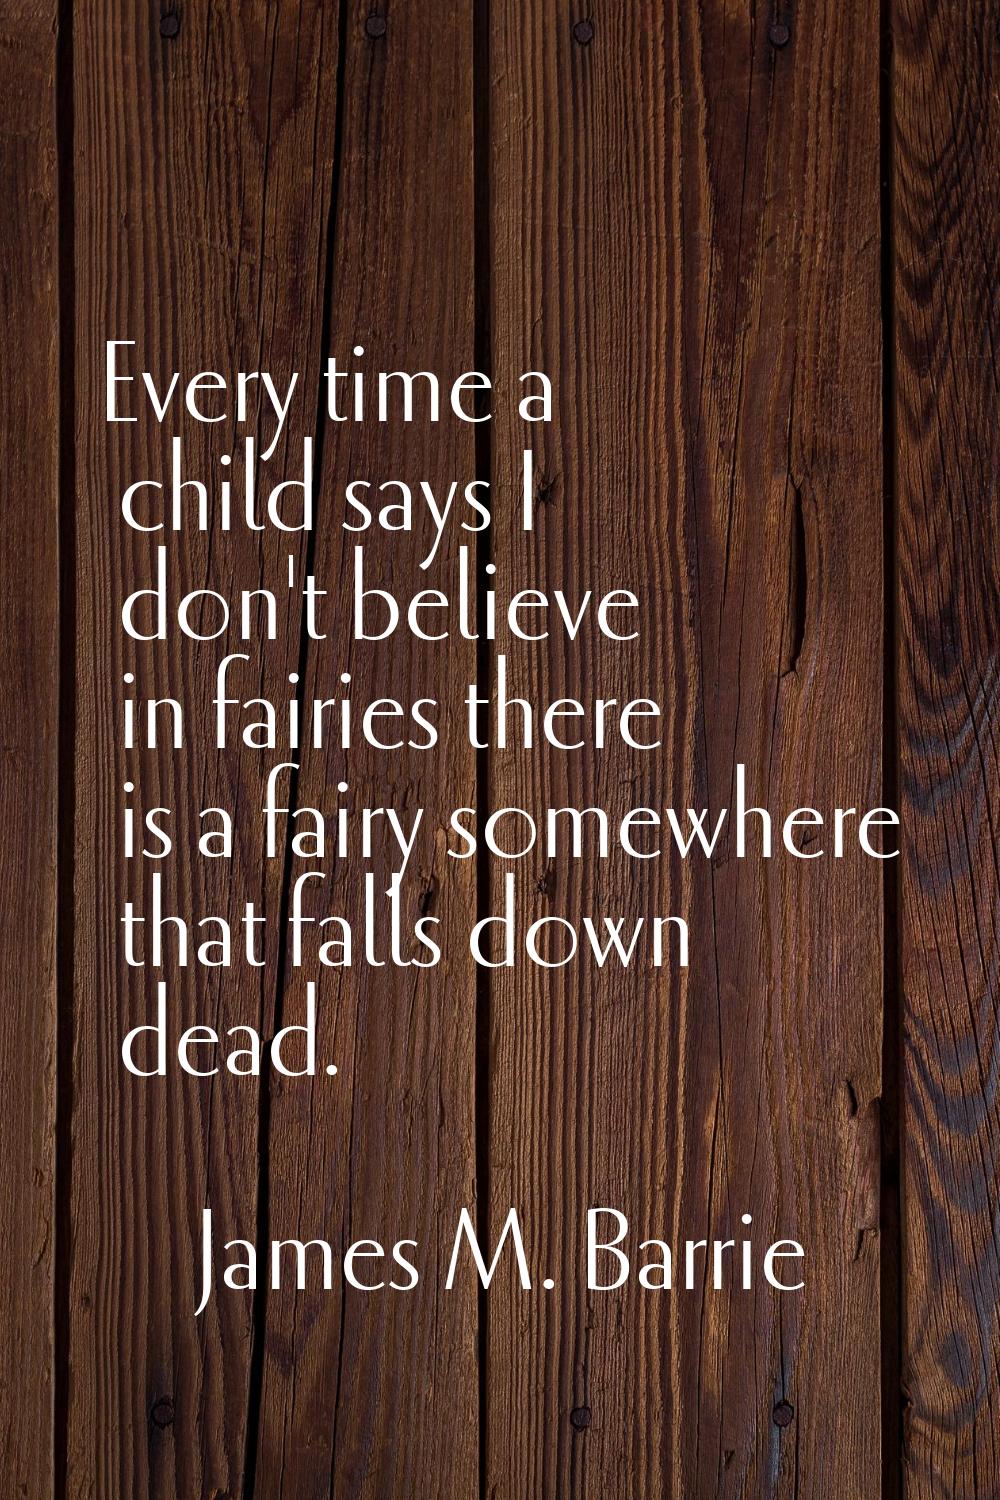 Every time a child says I don't believe in fairies there is a fairy somewhere that falls down dead.